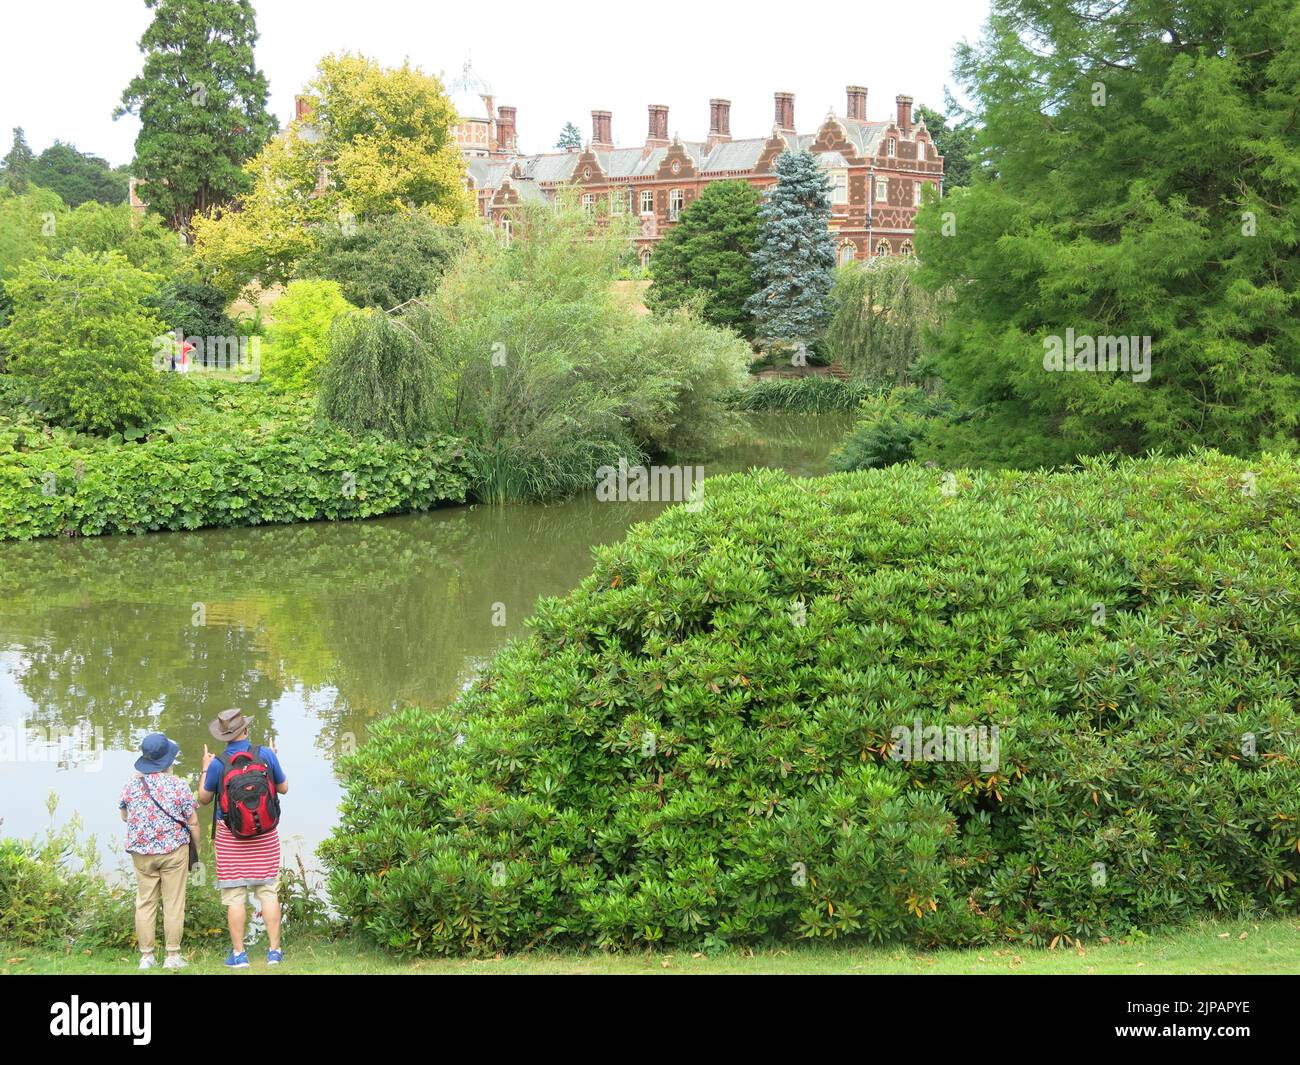 A visiting couple look across the lake towards the royal residence at Sandringham in Norfolk, the Queen's country retreat. Stock Photo